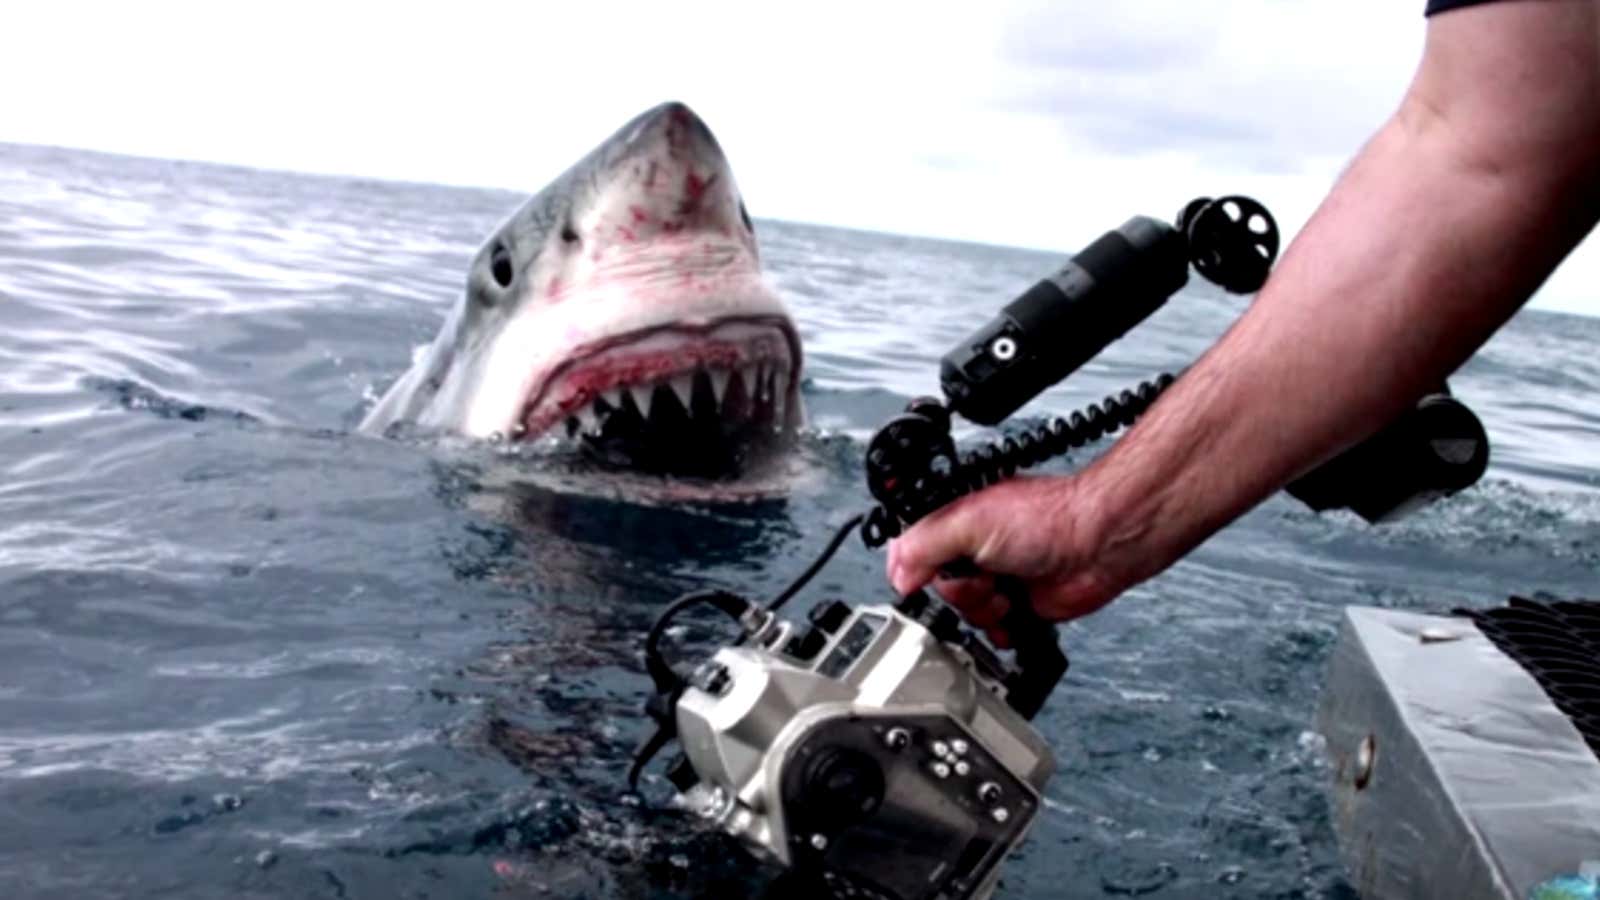 Video: Incredible Great White shark “researches” with her mouth